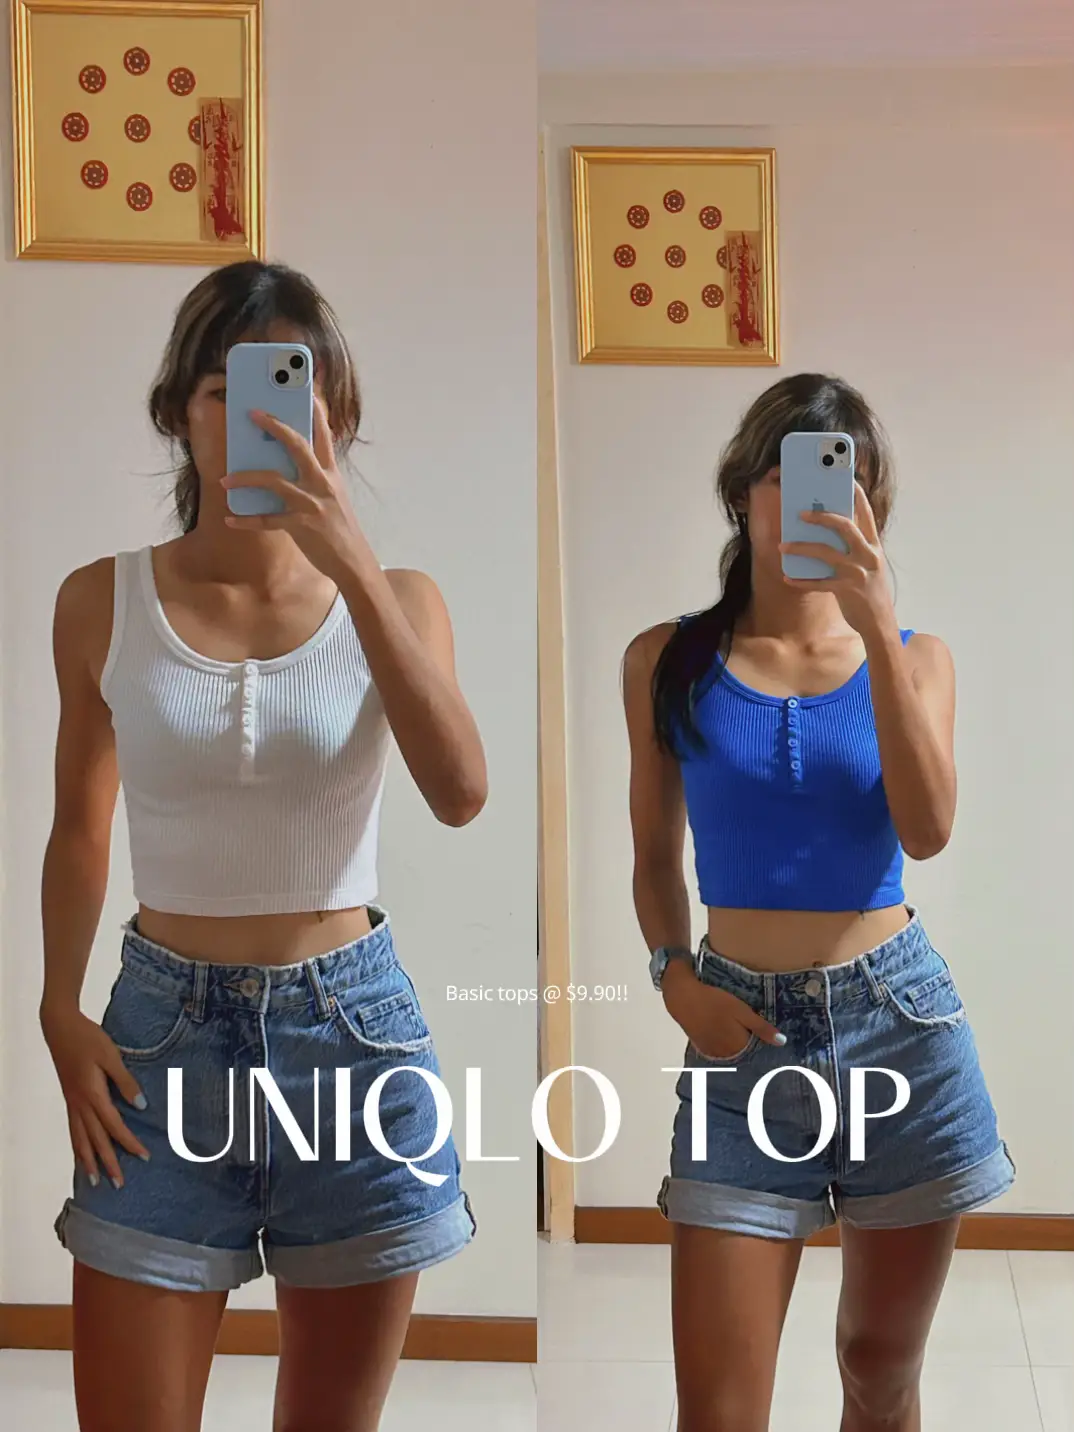 stay cool with these cute uniqlo tanks 🤩